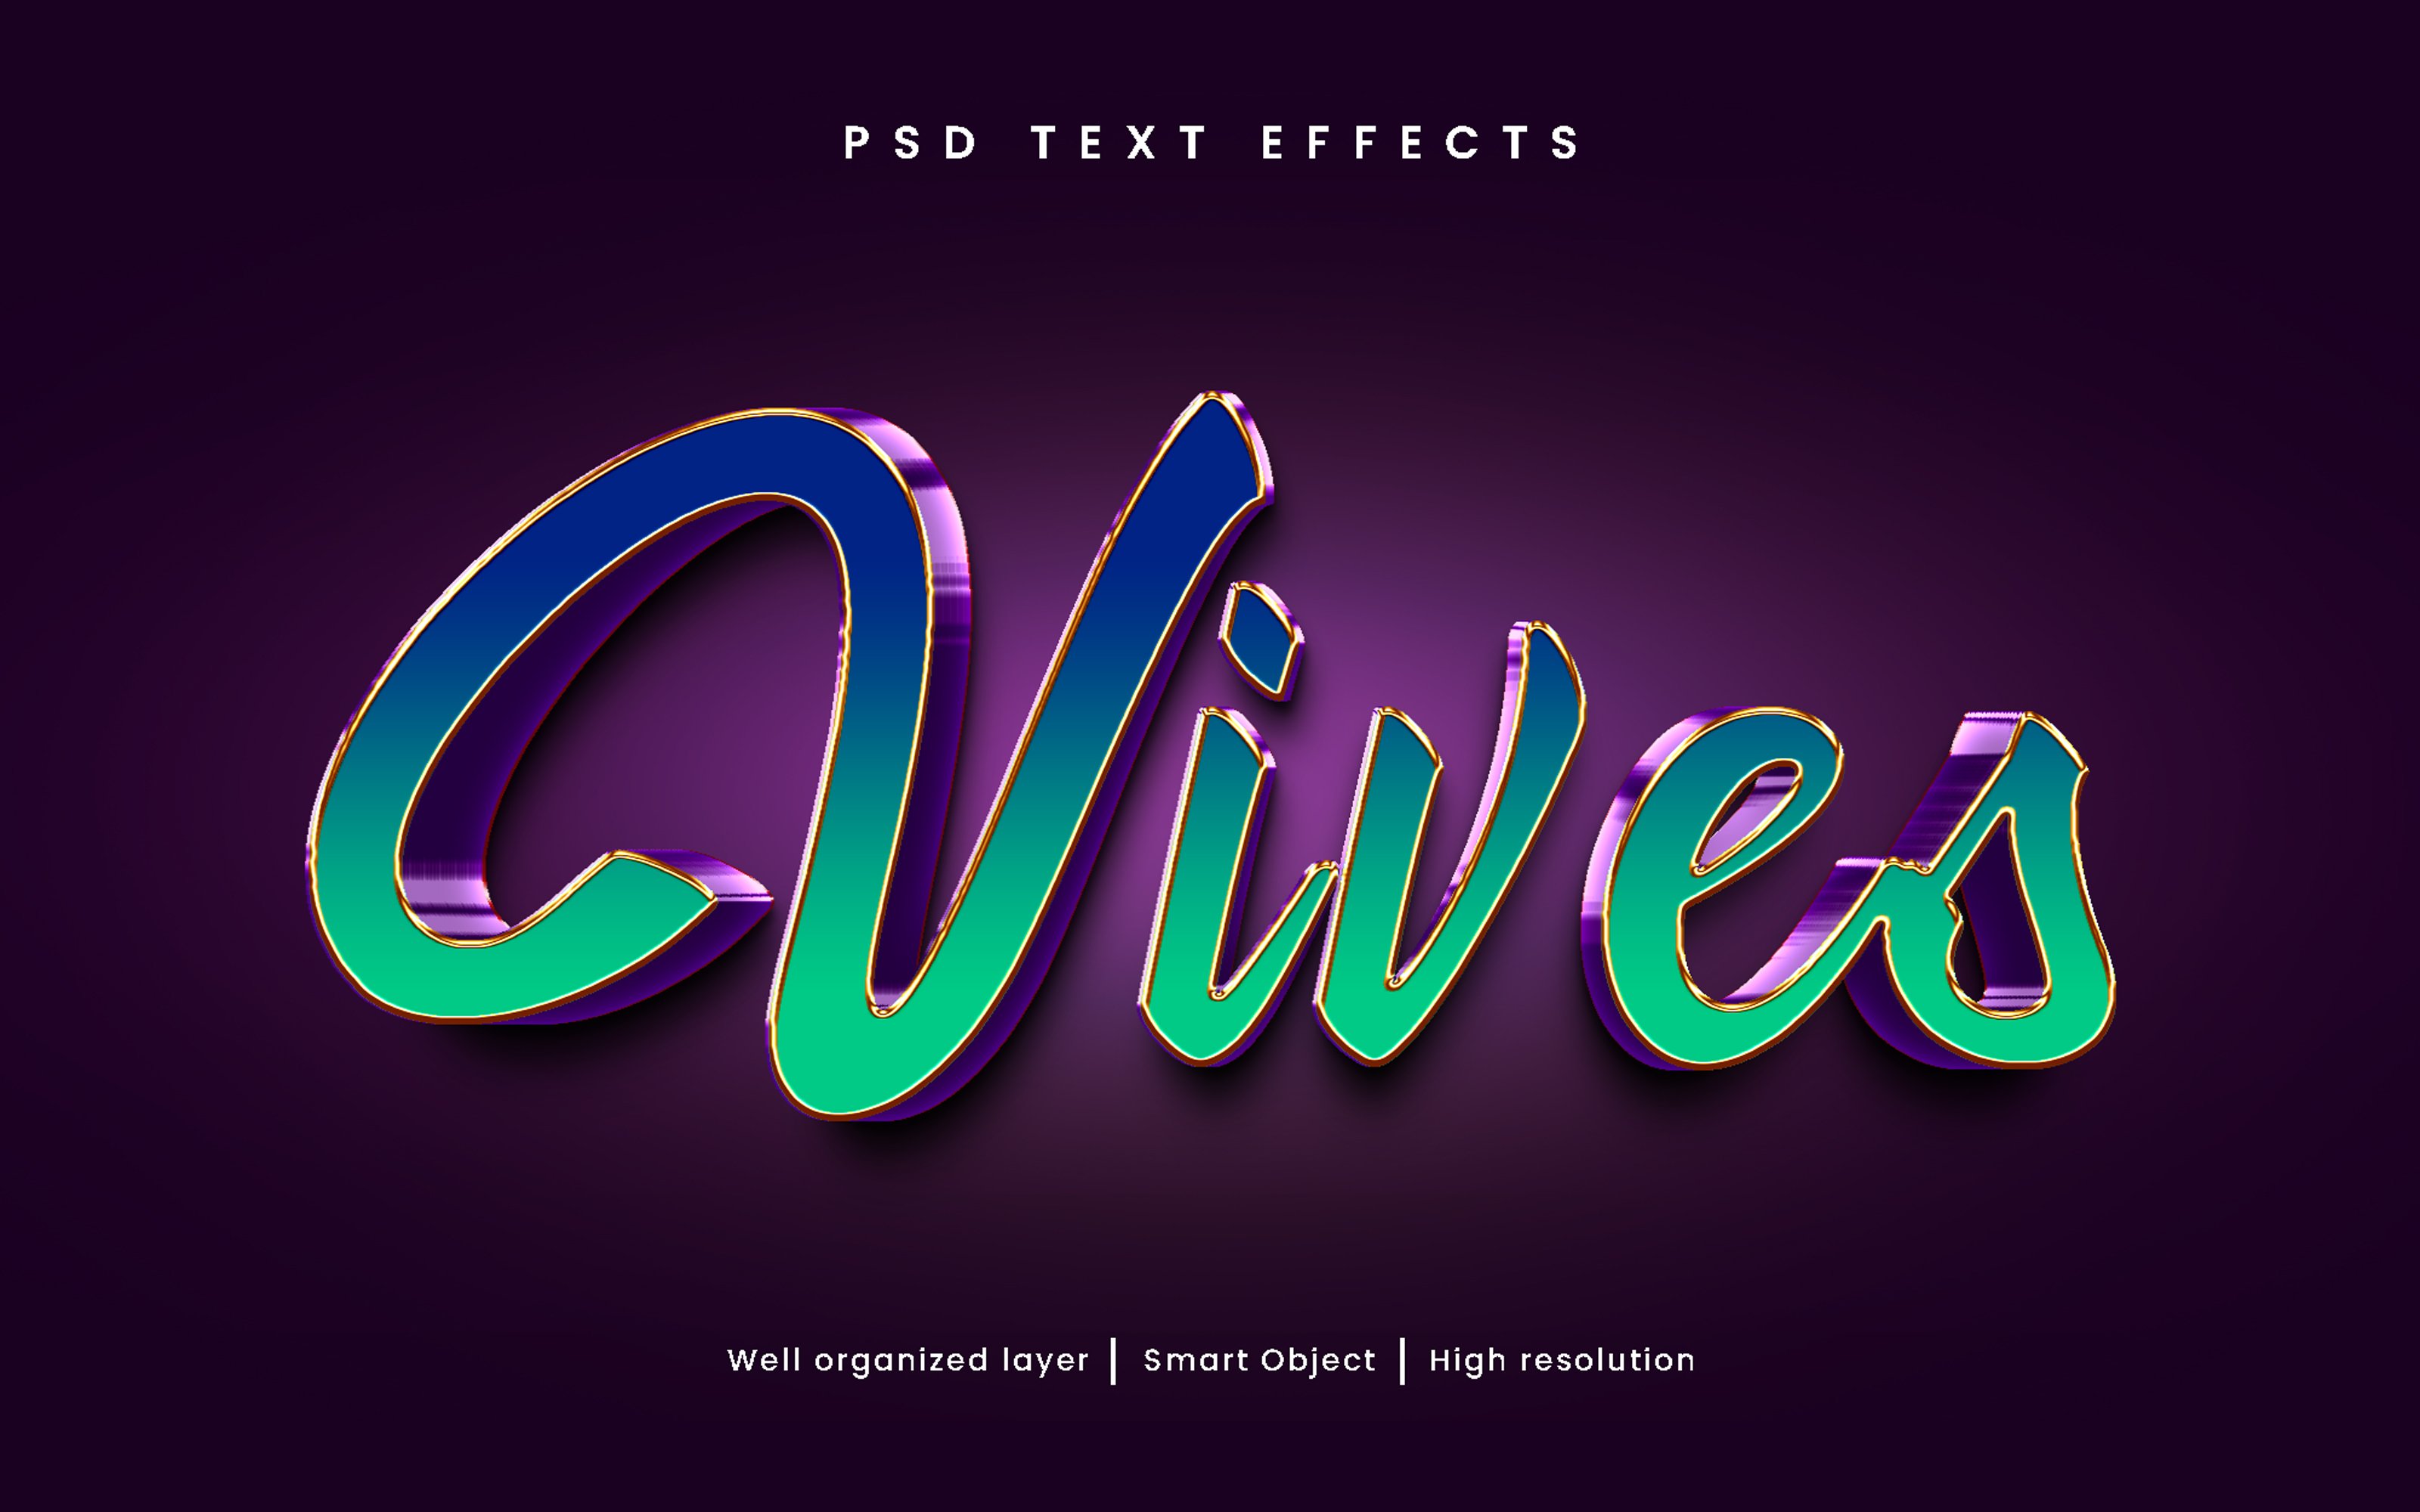 3D style vives editable text effectcover image.